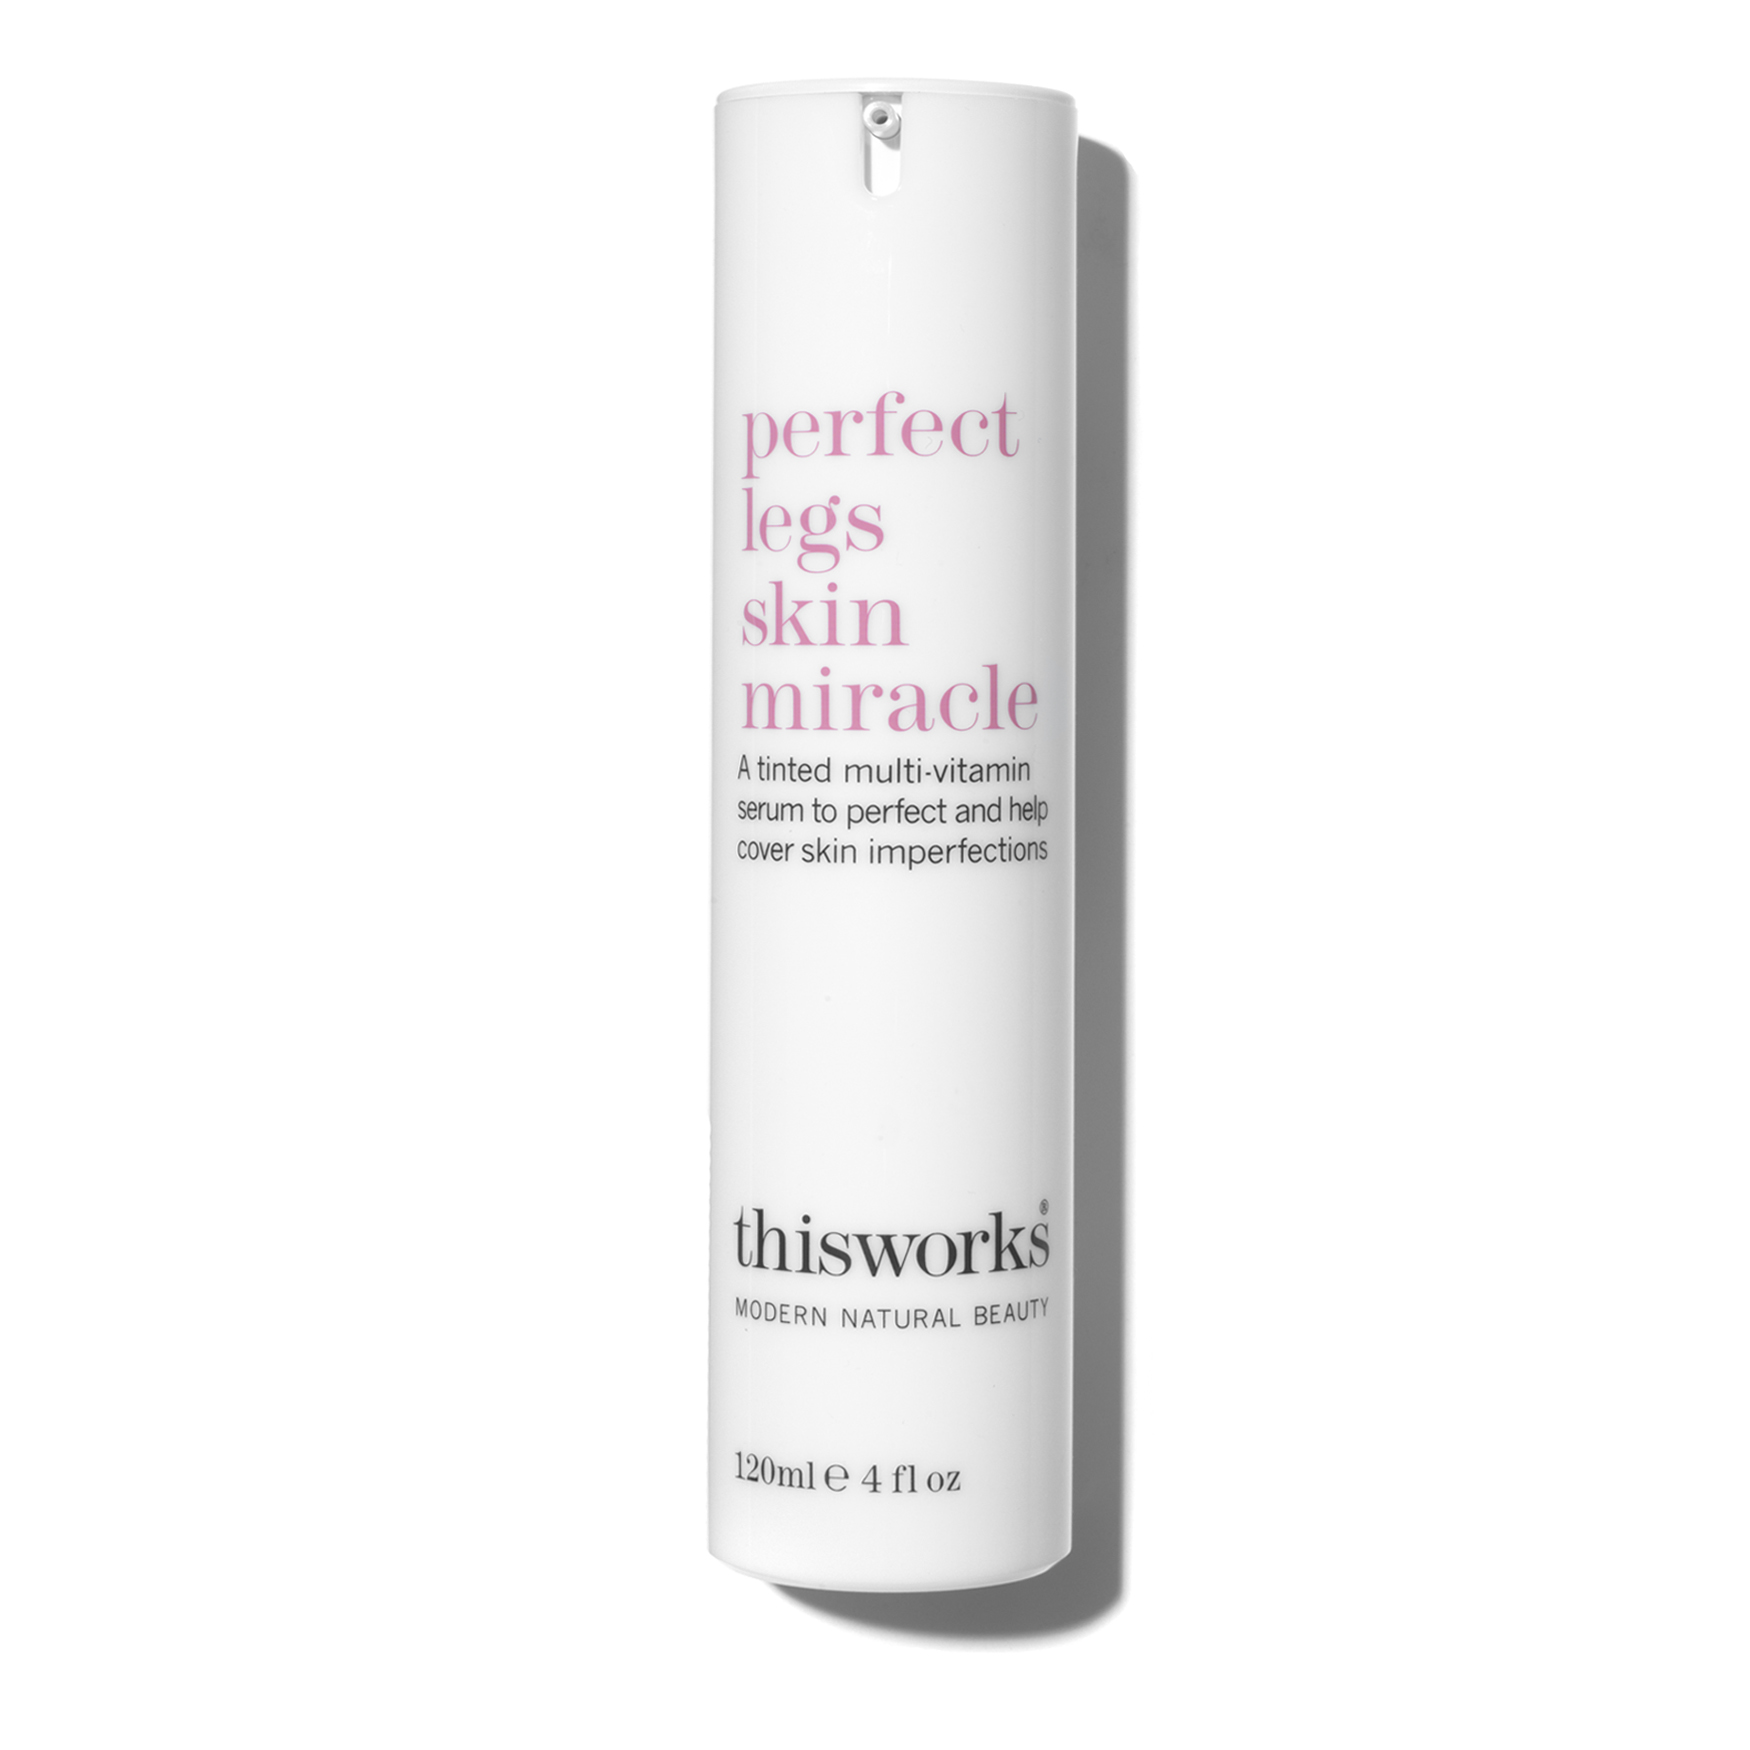 PERFECT LEGS SKIN MIRACLE - THIS WORKS | Space NK